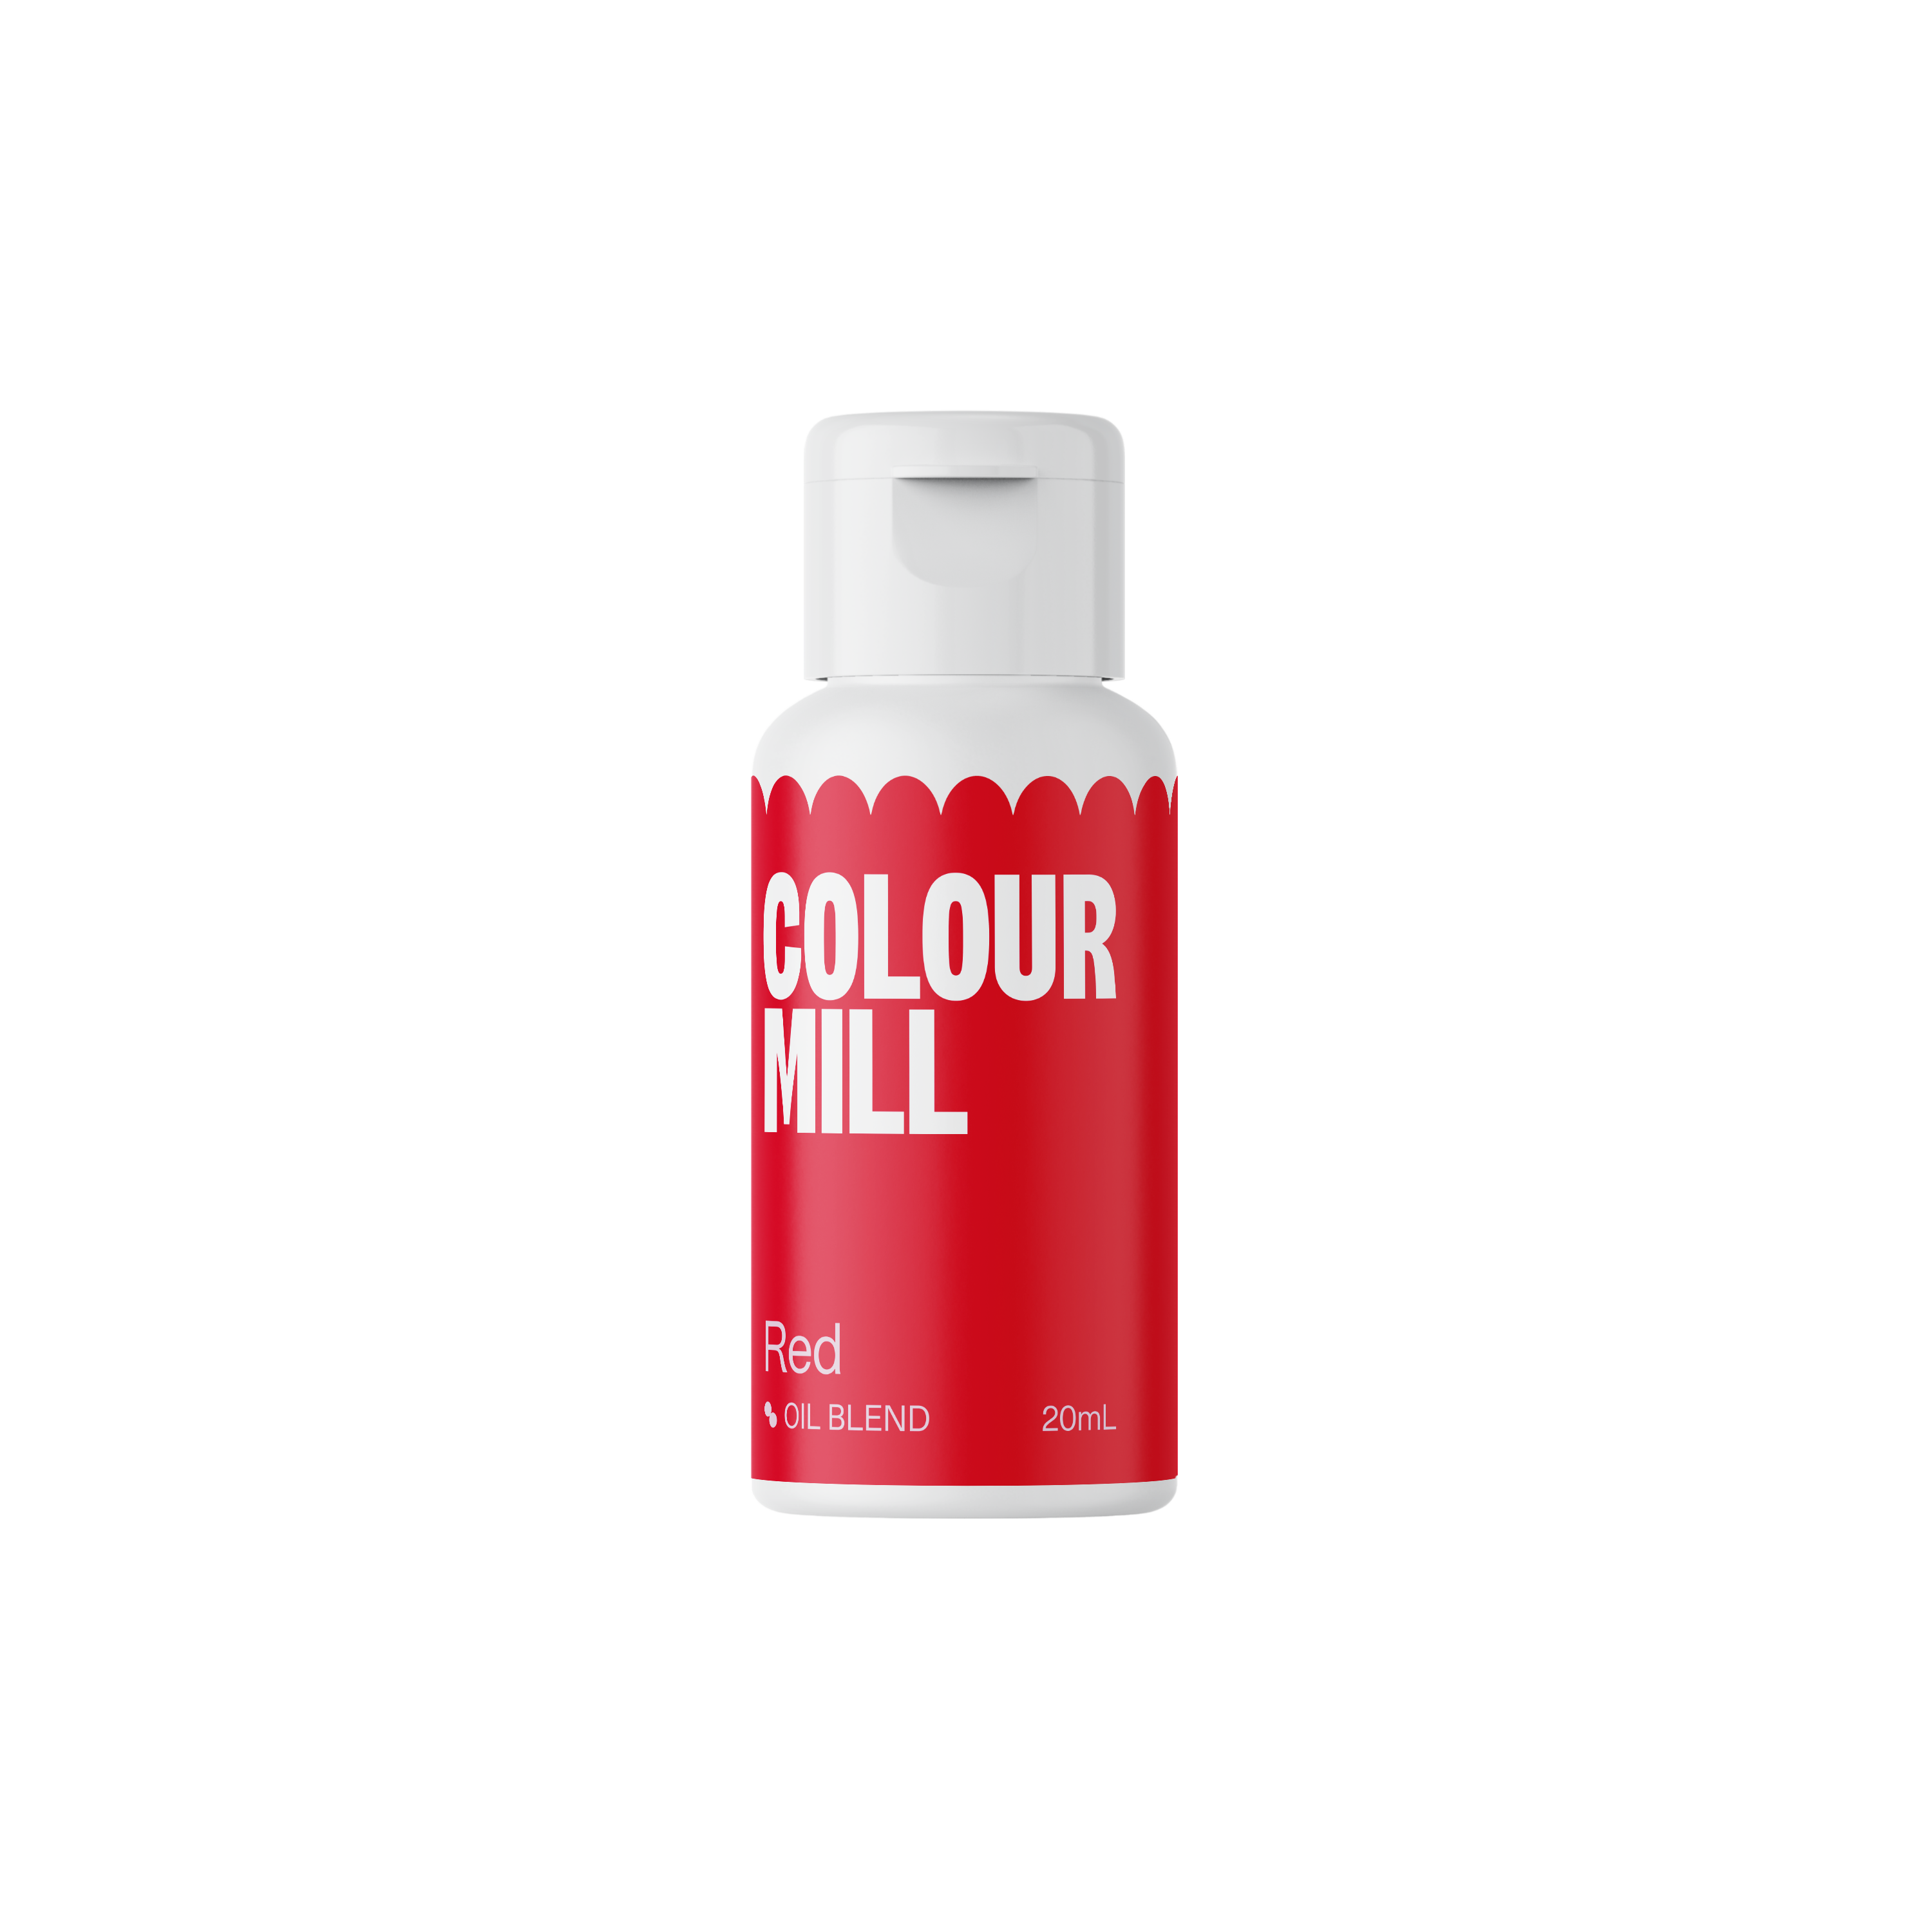 Red - Oil Blendproduct image